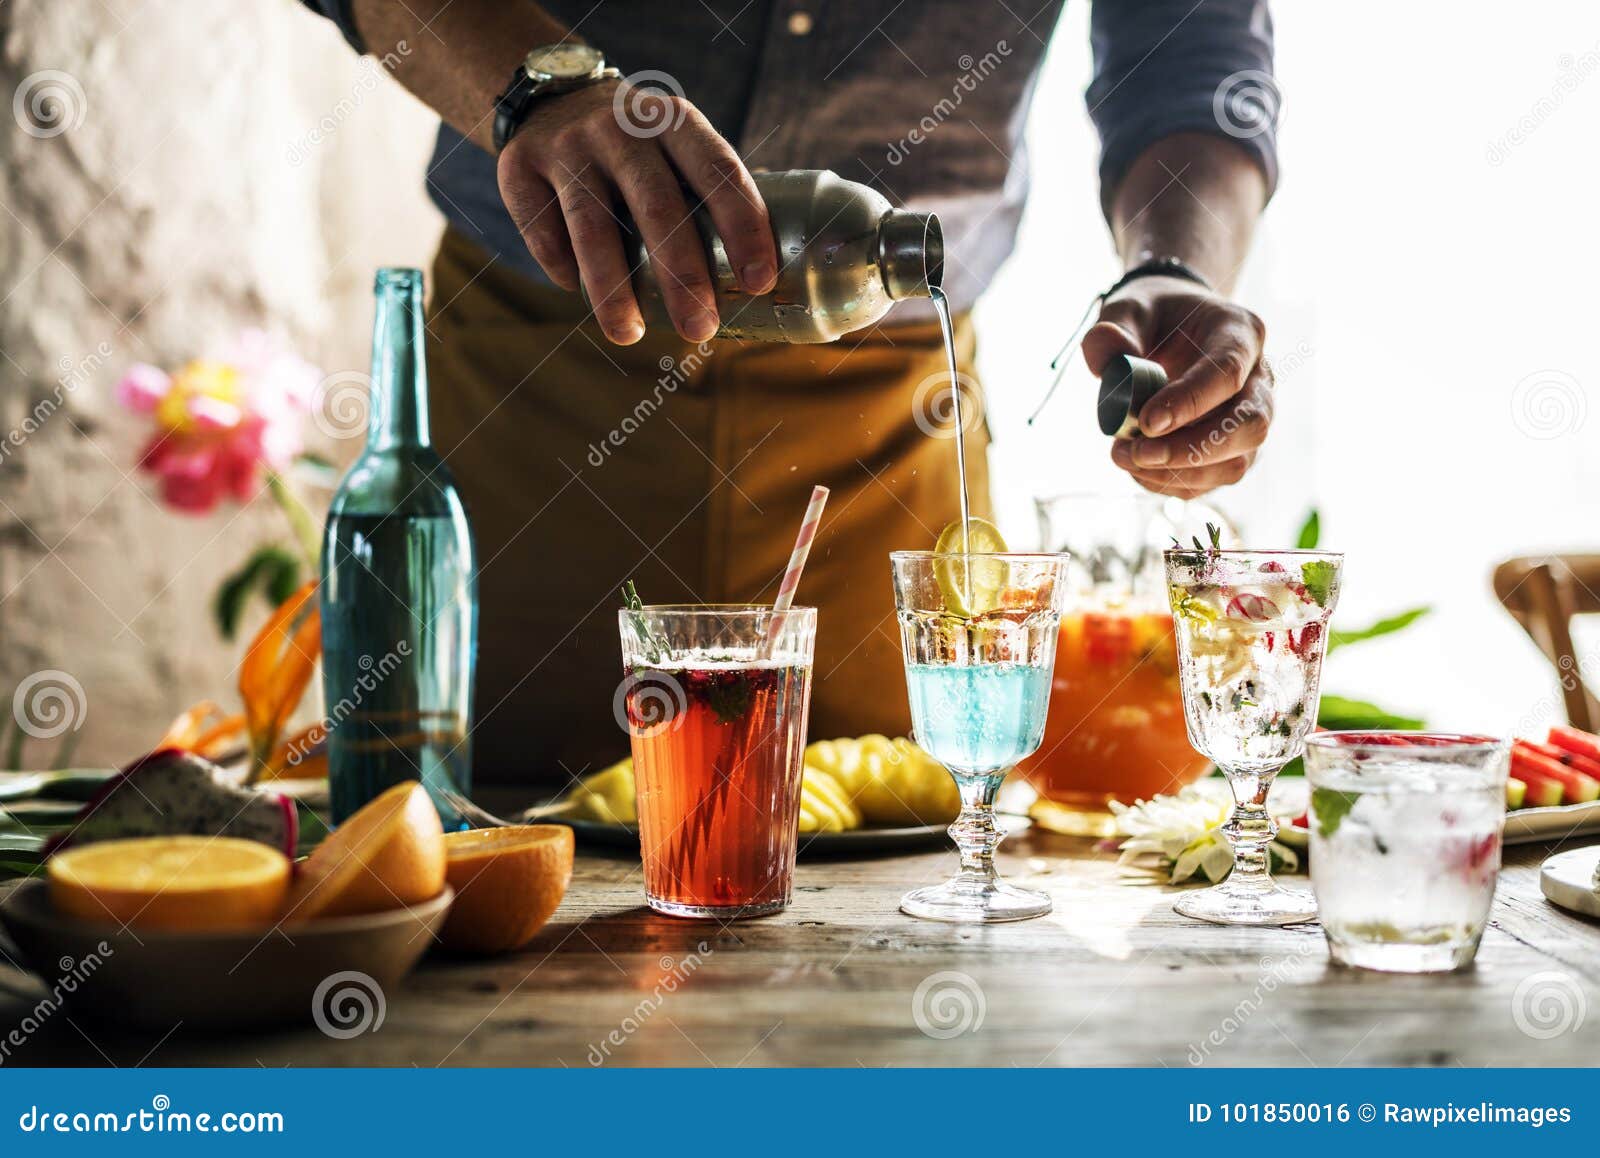 bartender mixing colorful cocktails